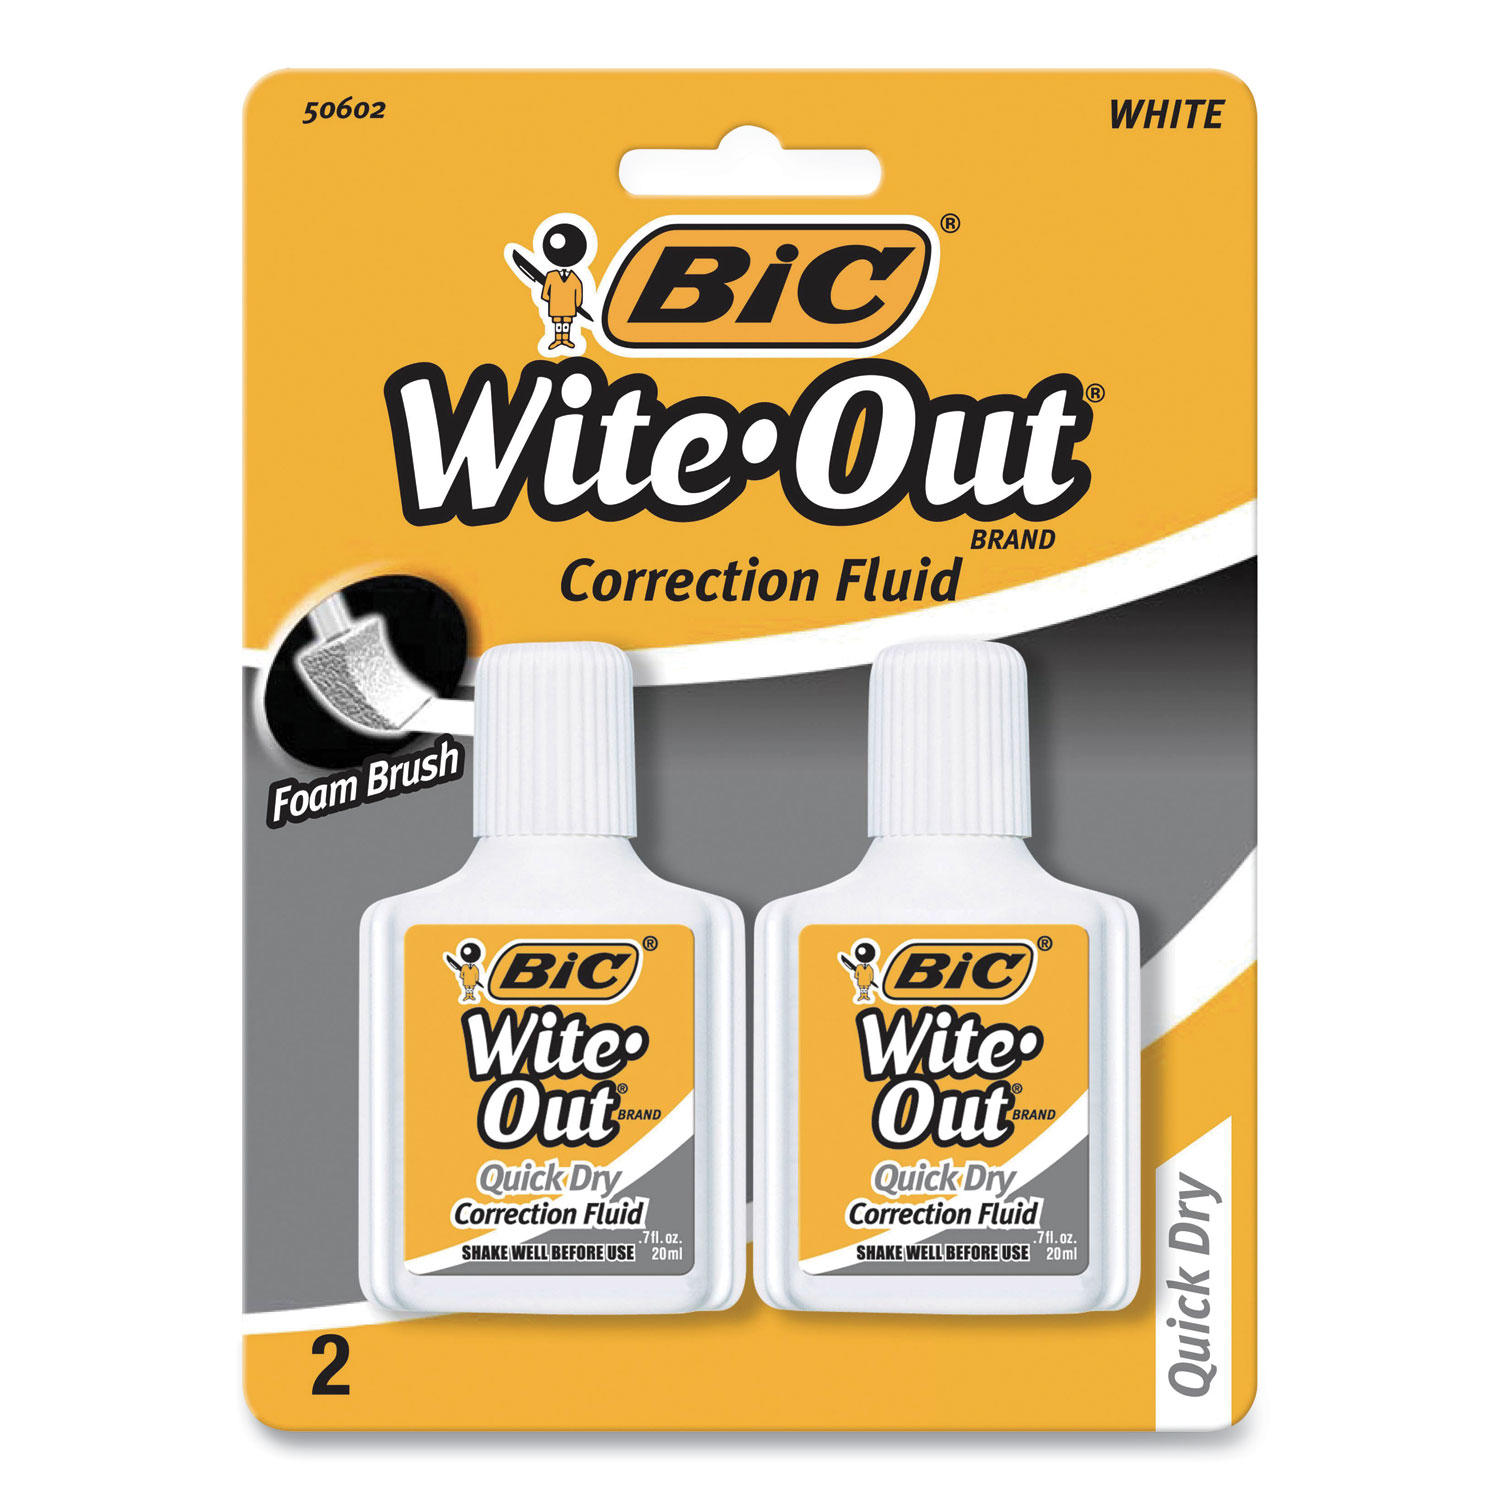 BIC Wite-Out Brand Quick Dry Correction Fluid, 20 ml Bottles, 12-Count